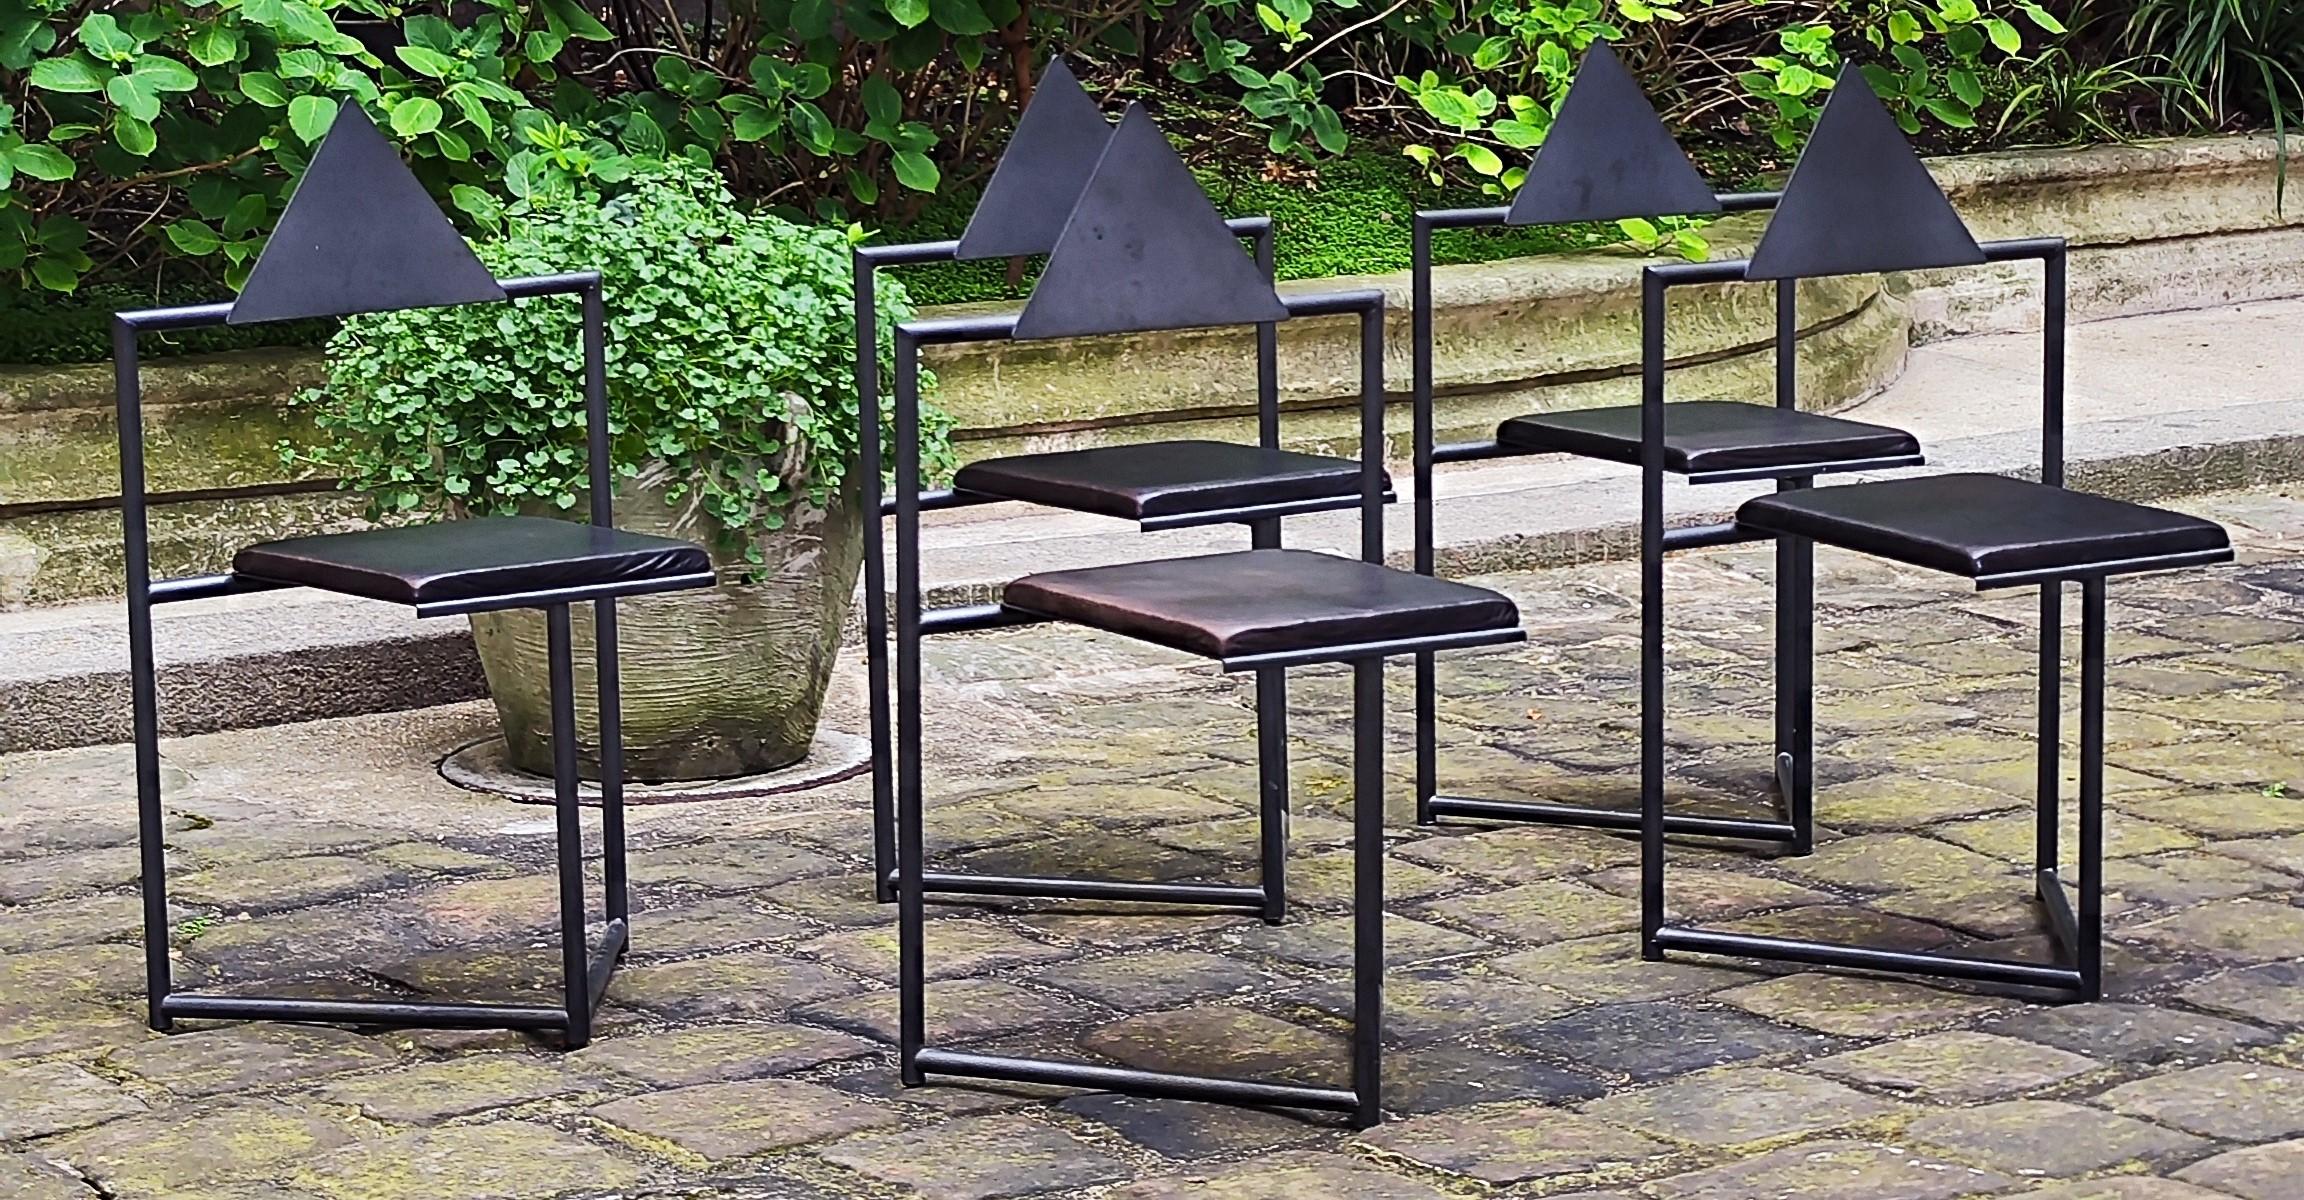 5 Chairs, 1980s steel and leather that might be by Mario Botta or Martin Szekely For Sale 11